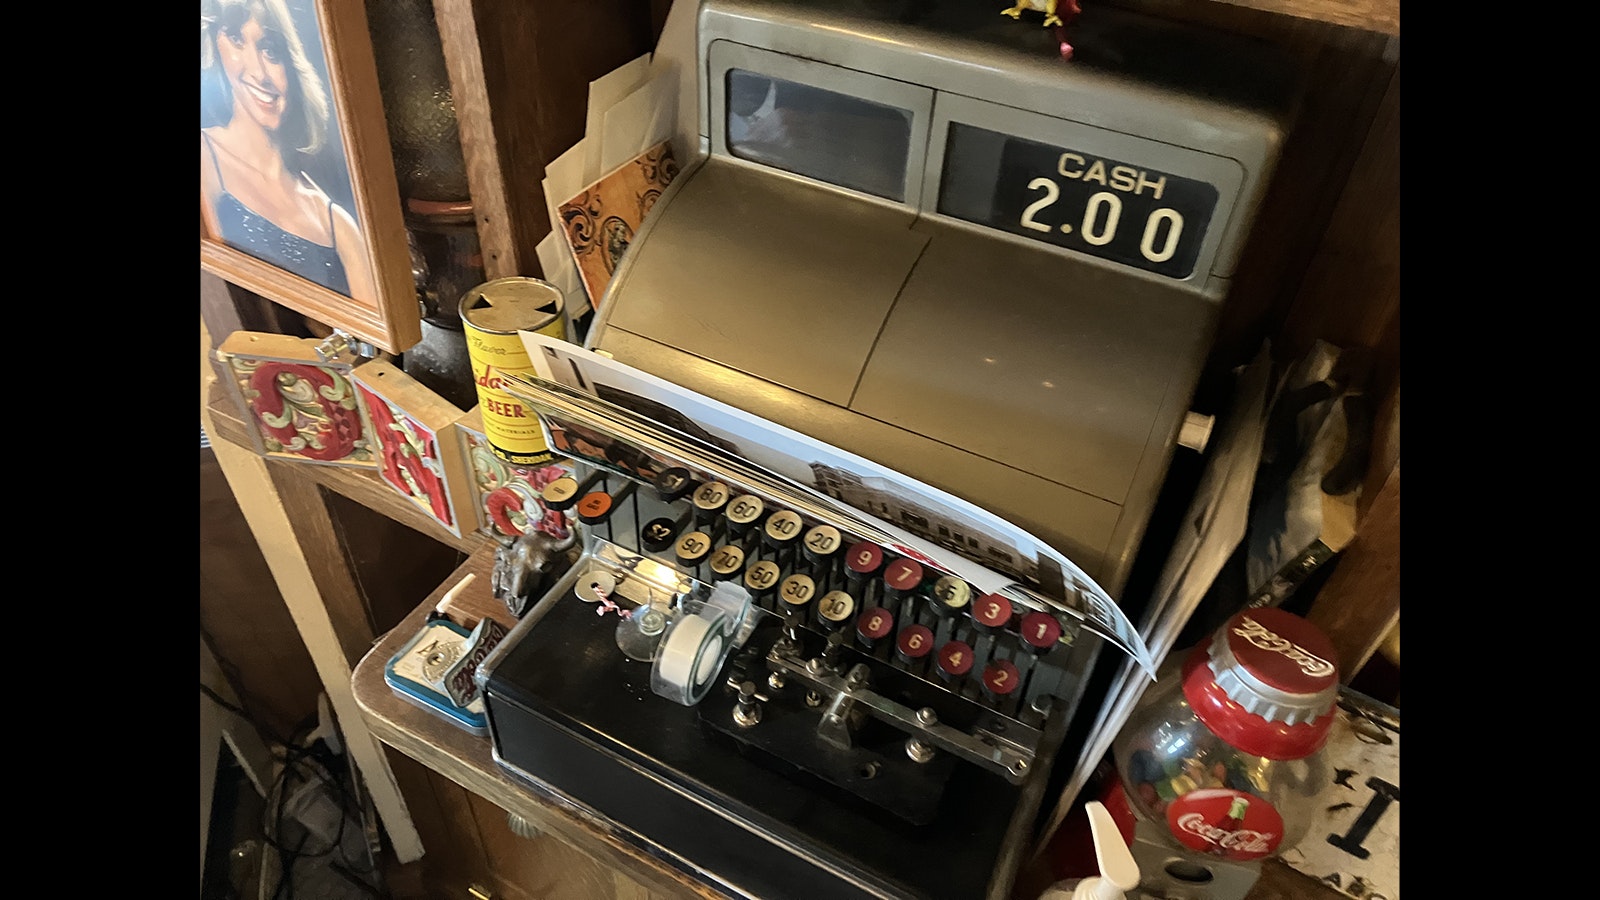 A 1948 cash register used by the Panos family.